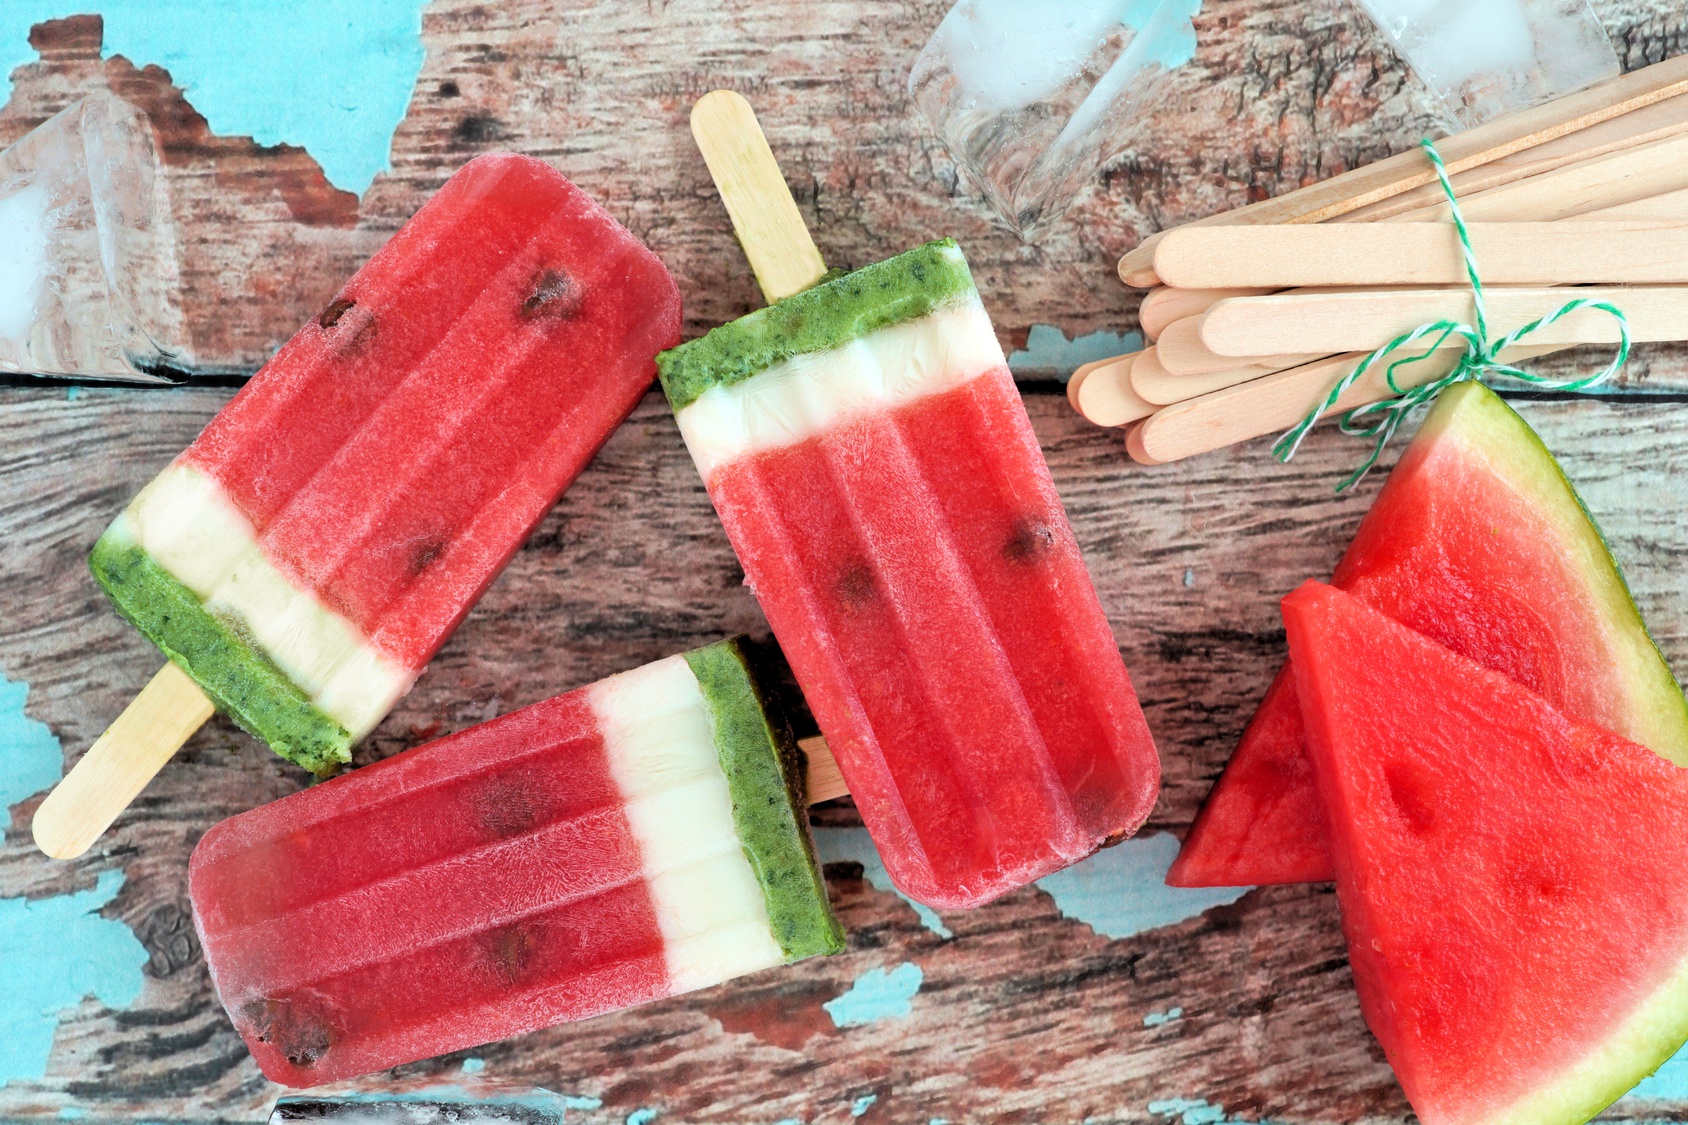 Homemade watermelon ice pops with melon slices against rustic wood background